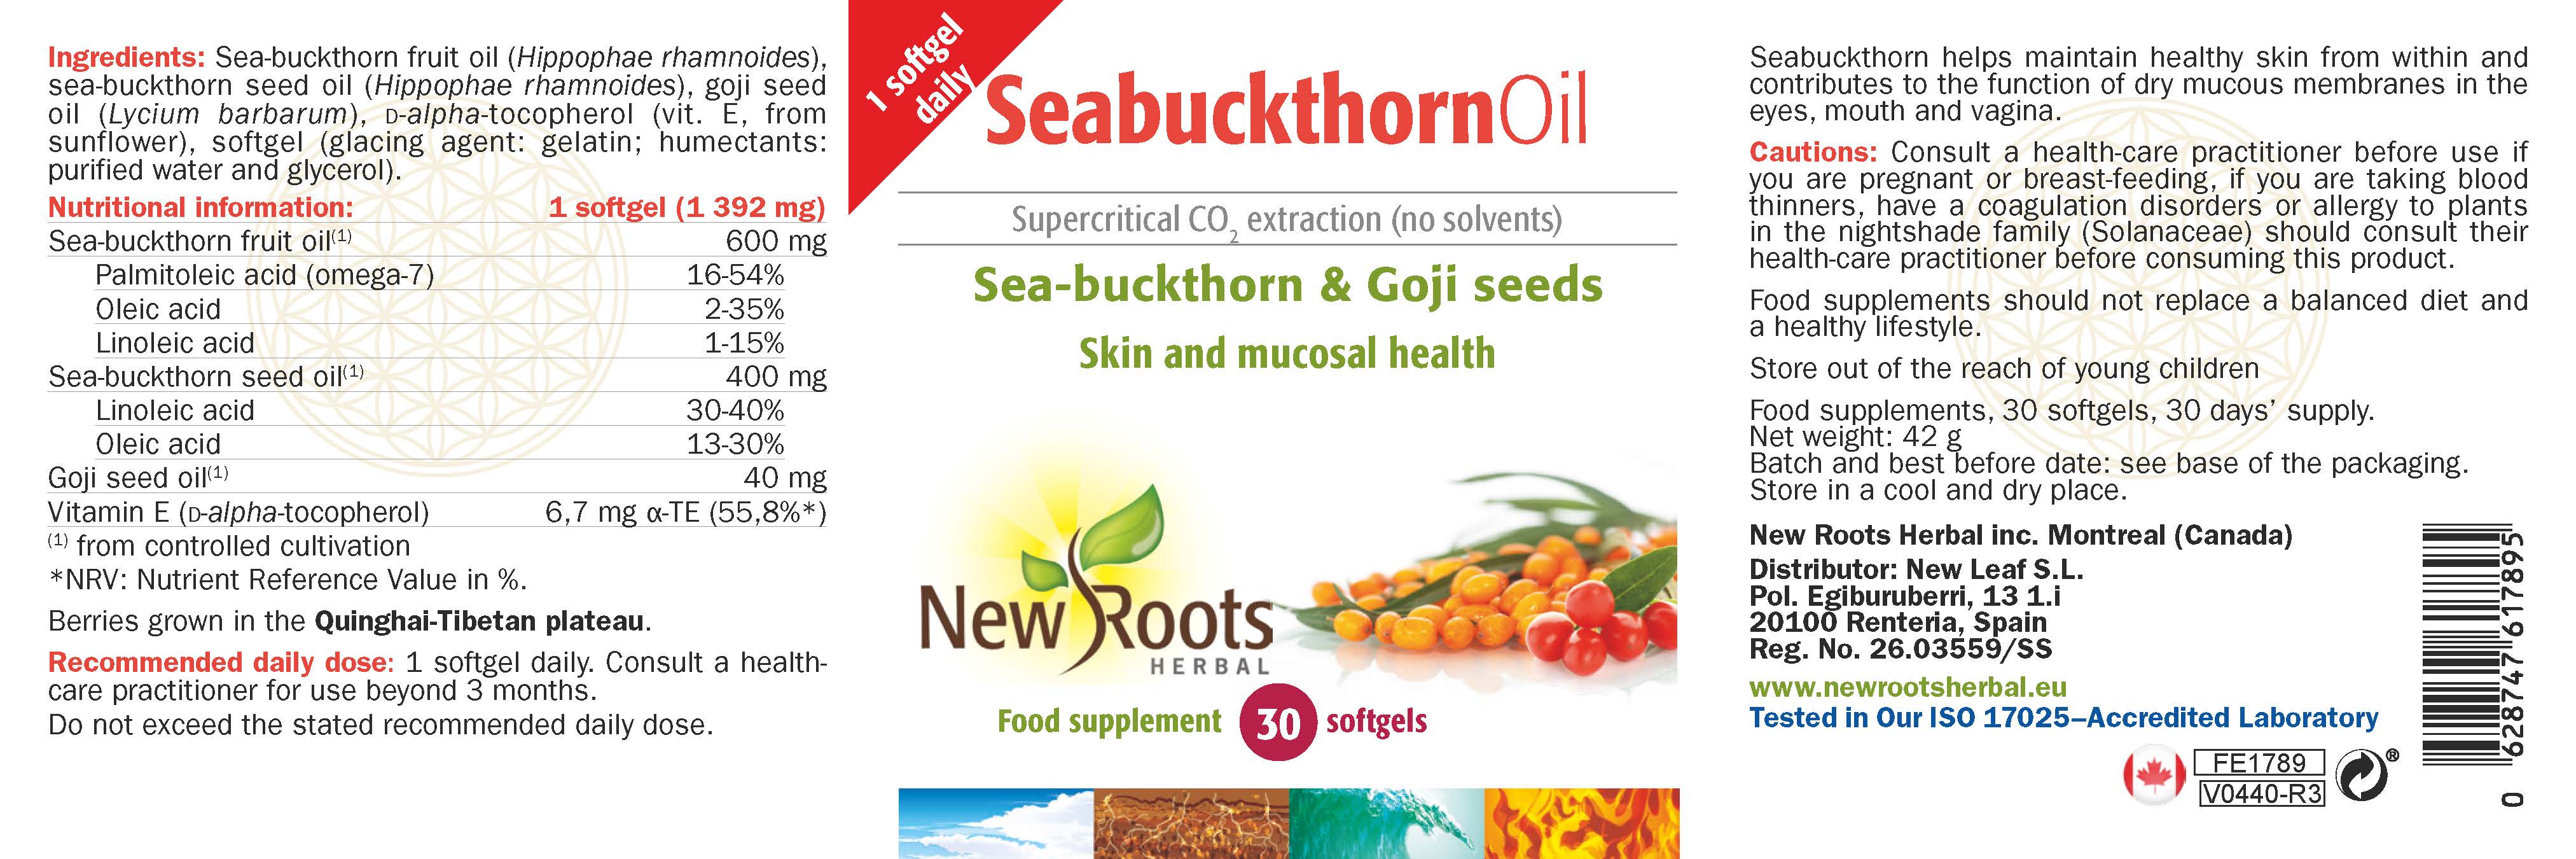 New Roots Herbal Seabuckthorn Oil 30's